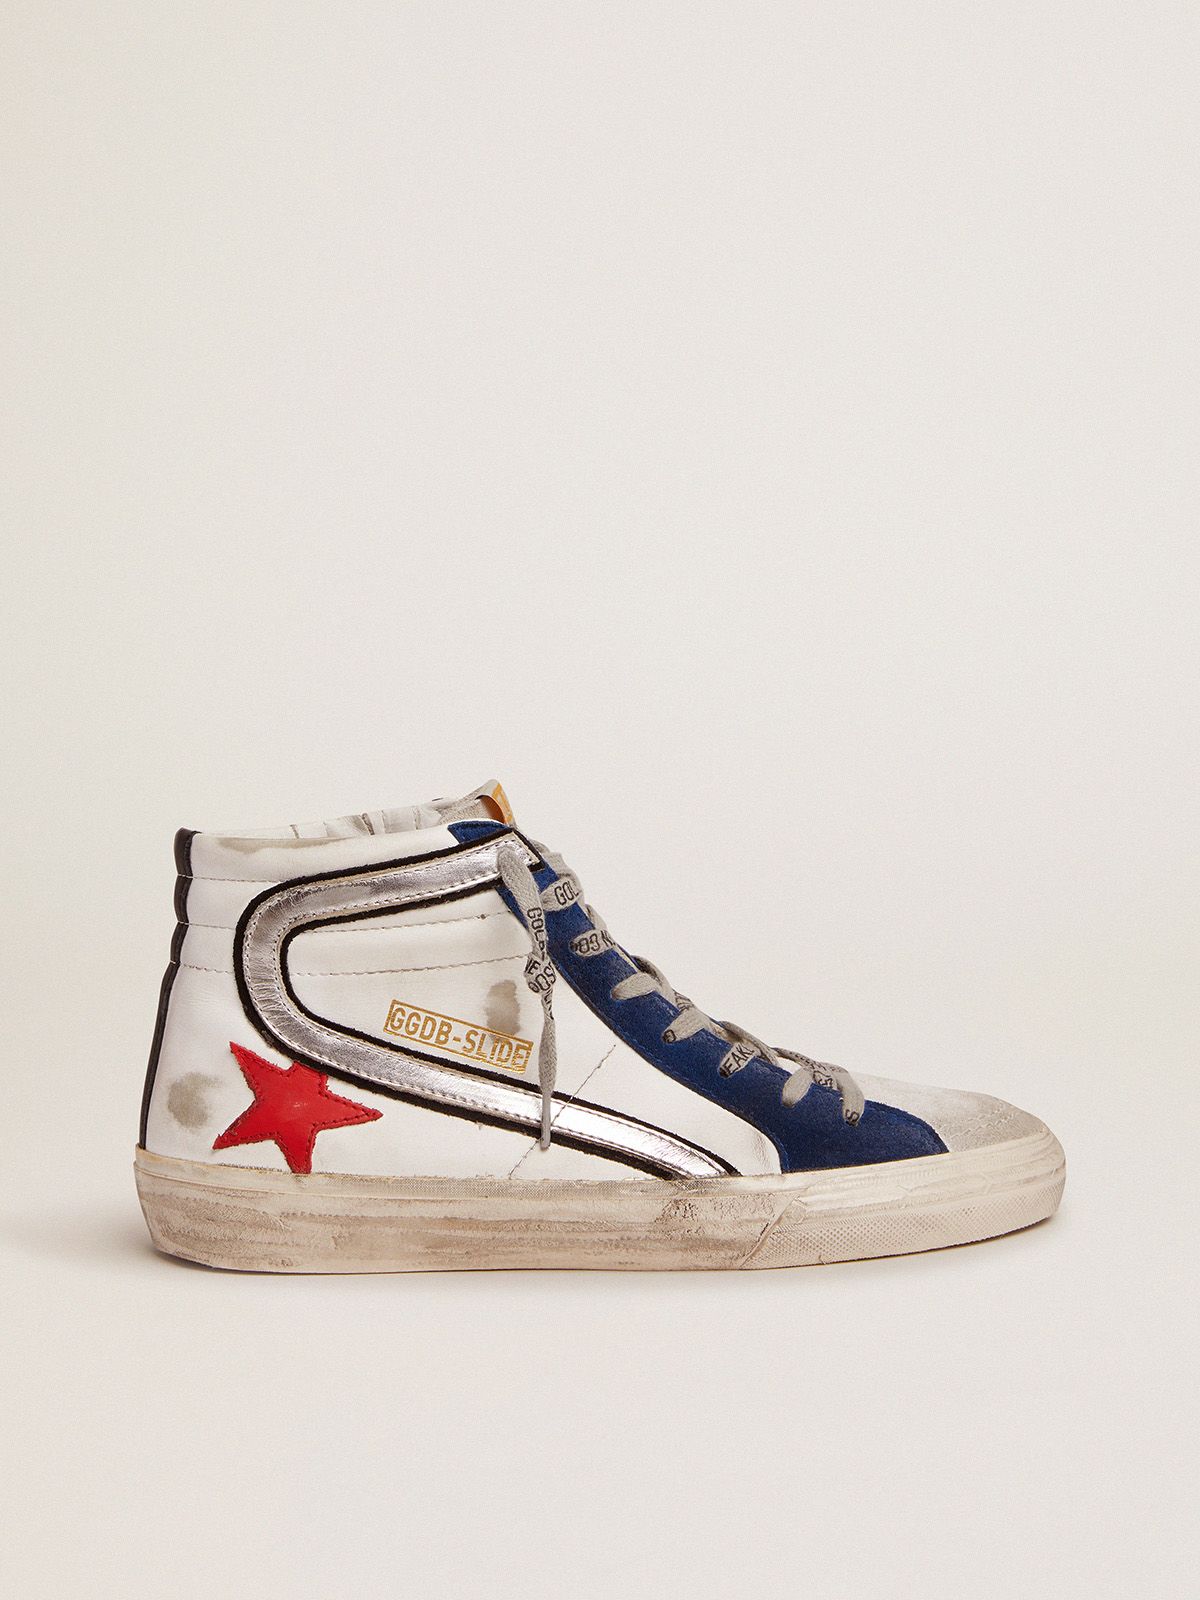 golden goose red in leather Slide sneakers with white star